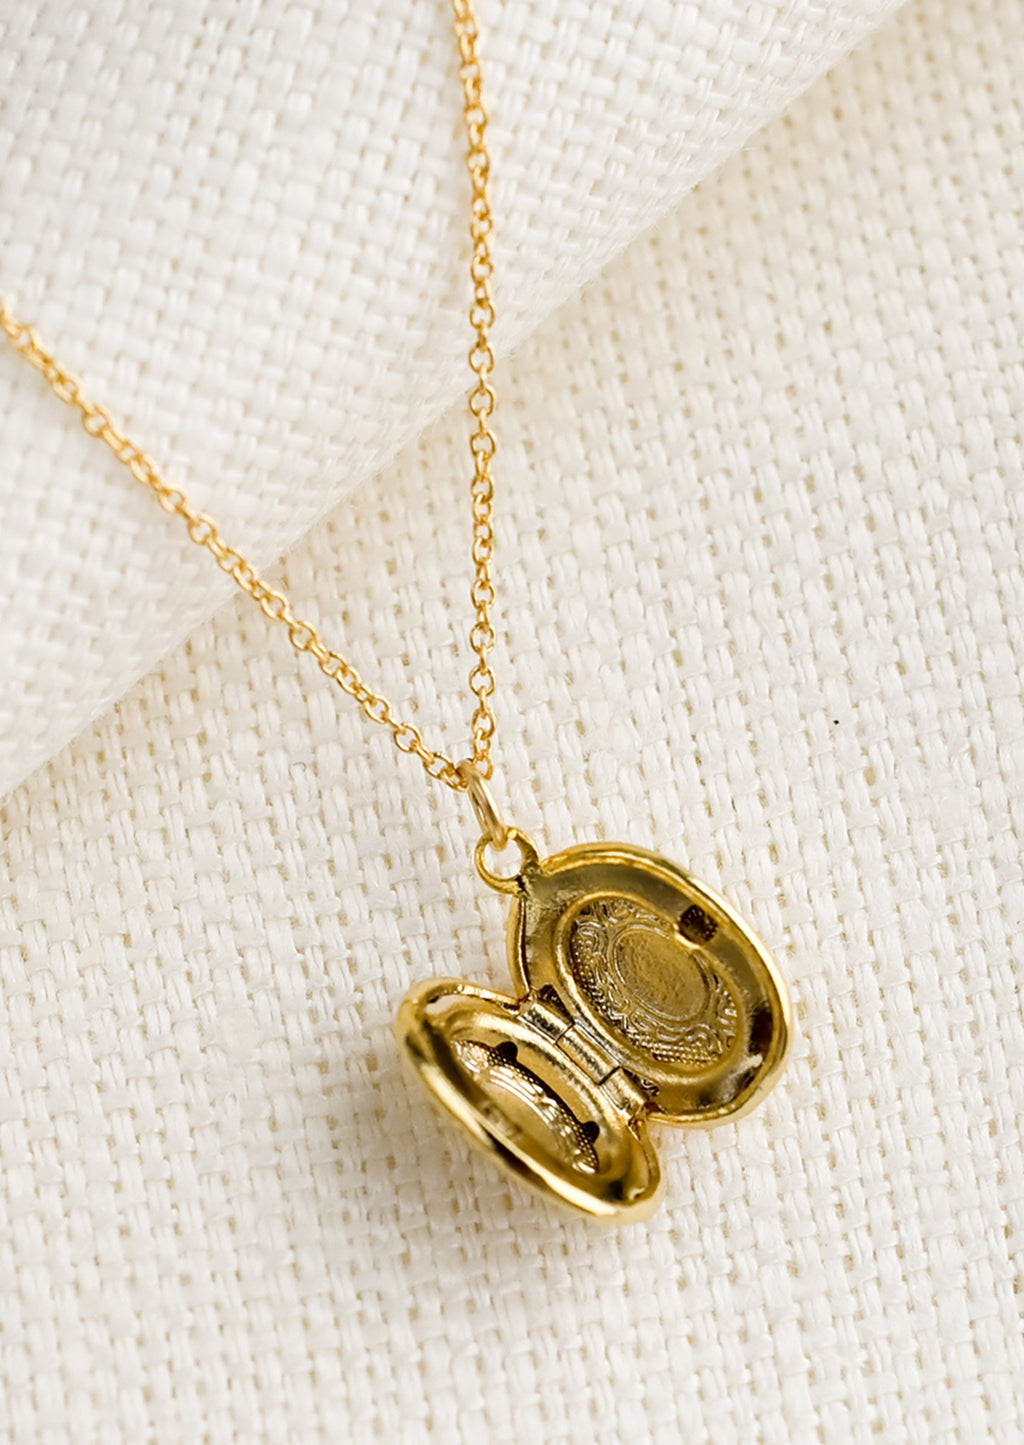 2: A oval shaped locket necklace with antique inspired engraving.